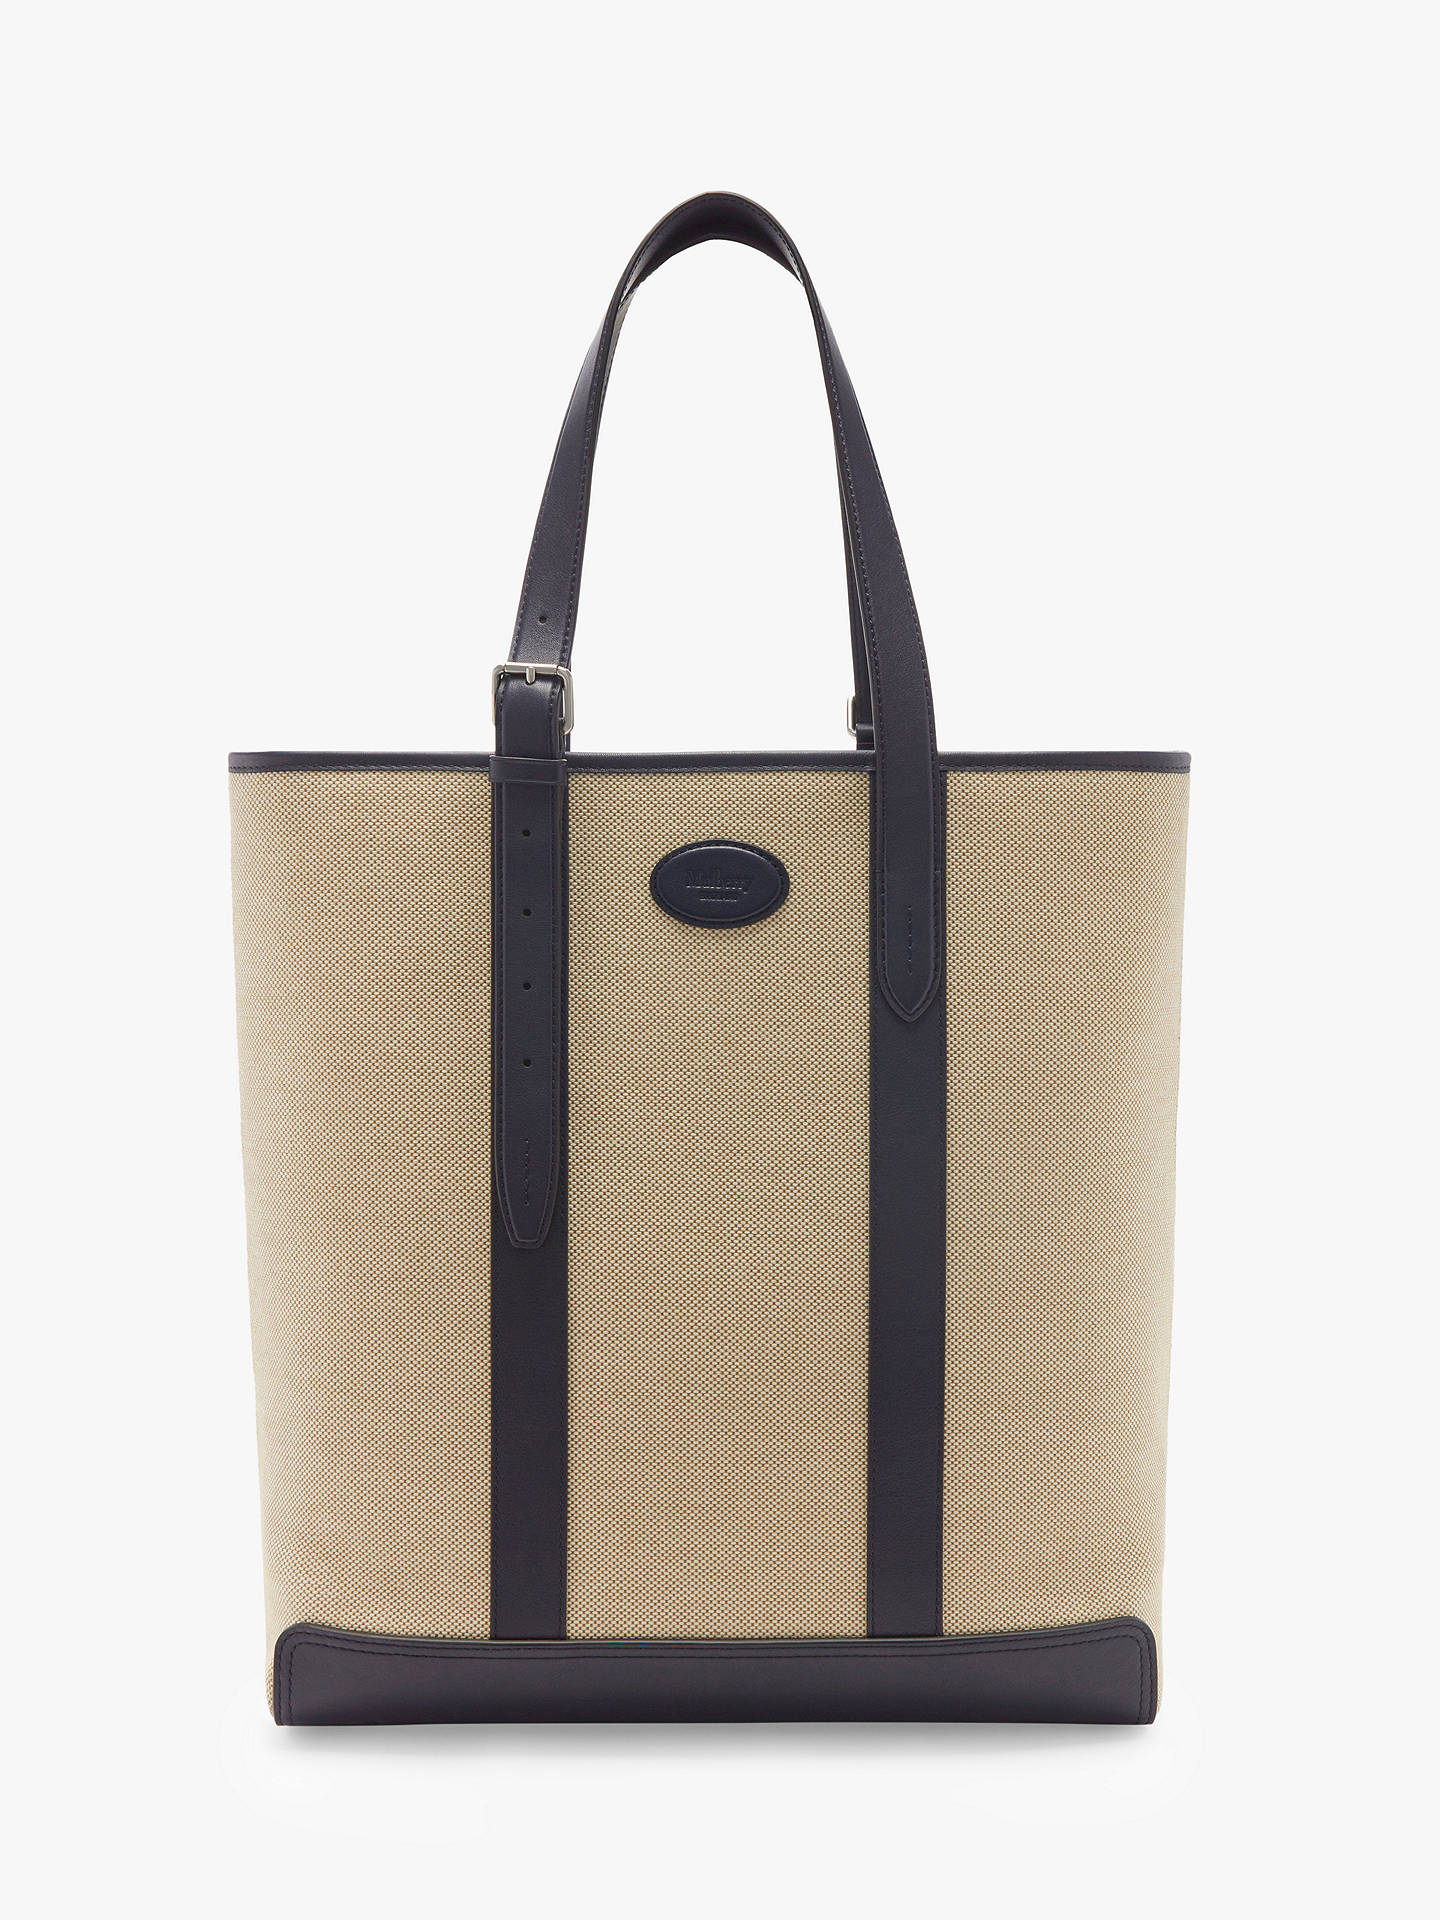 Mulberry Heritage Tote Bag, Midnight at John Lewis & Partners